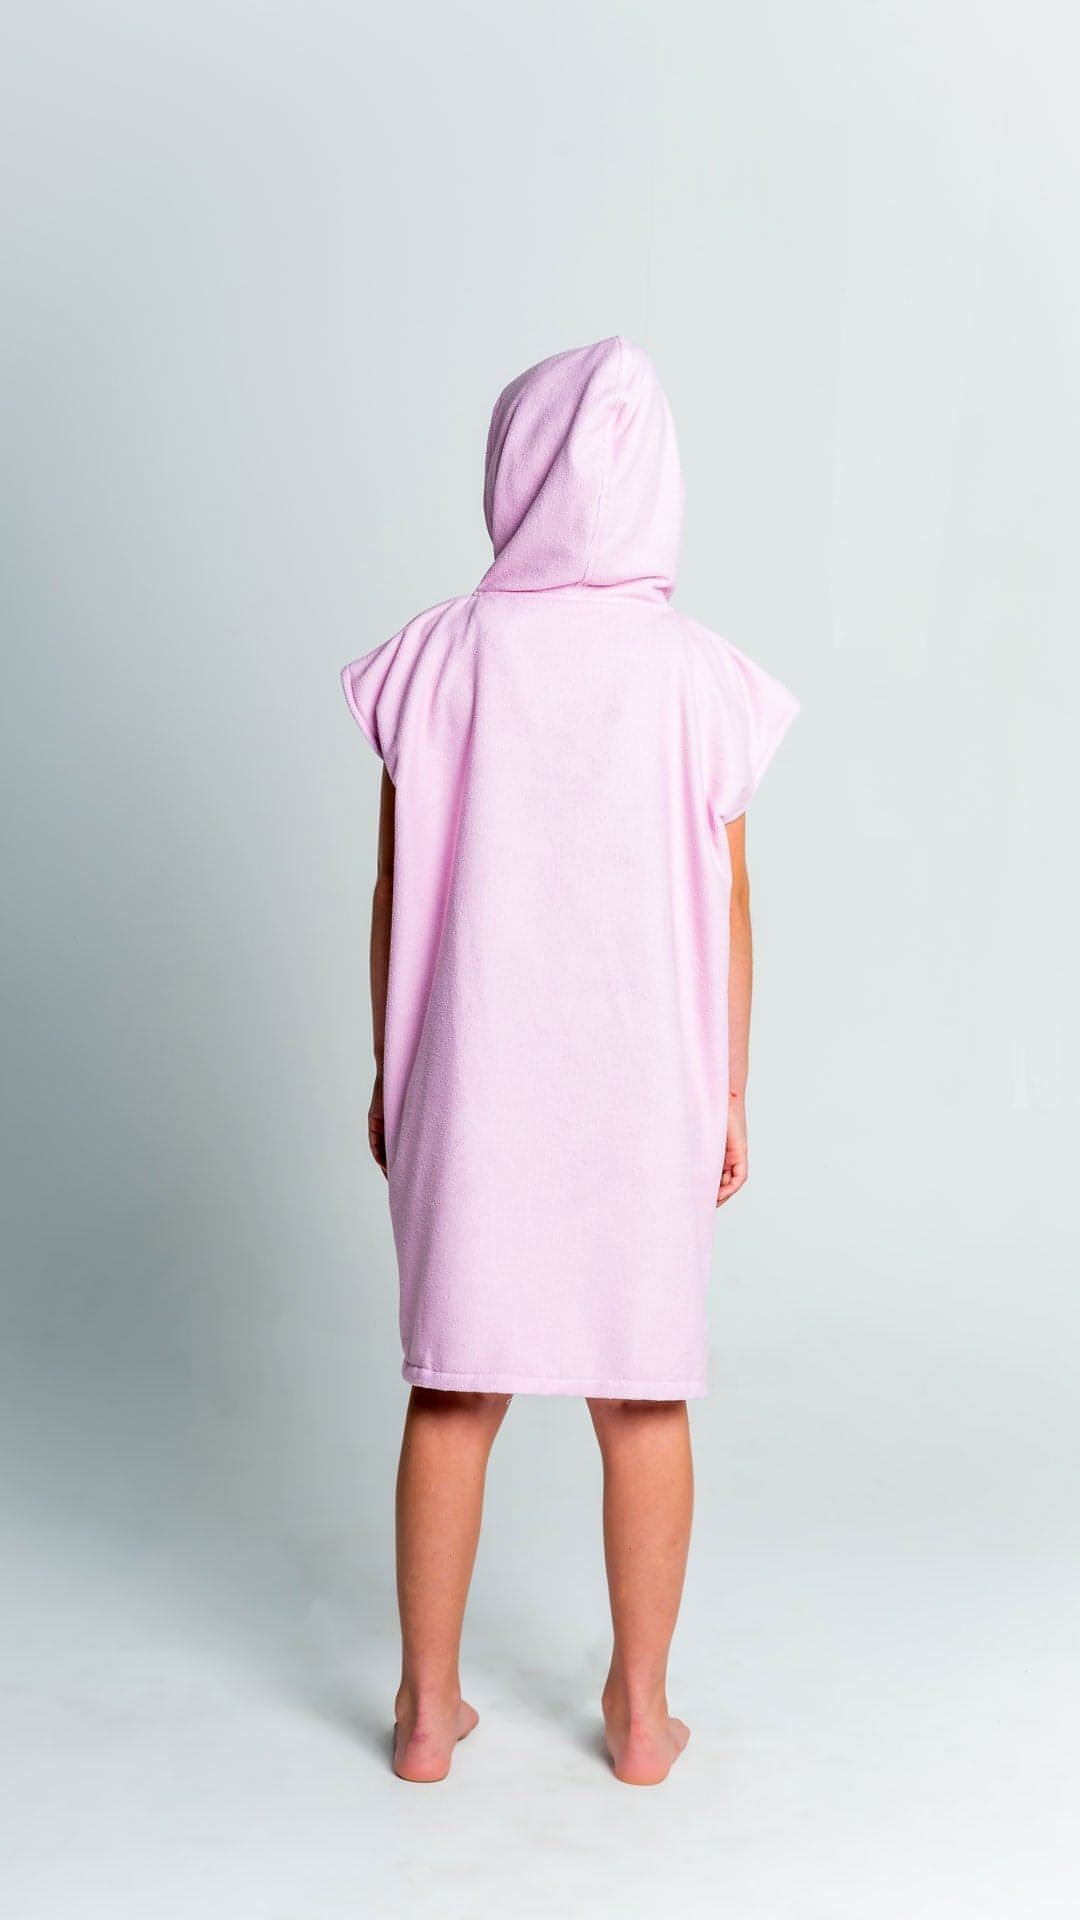 Hooded Towel Youth, Kids, Boys, Girls - Pink back with Hood on